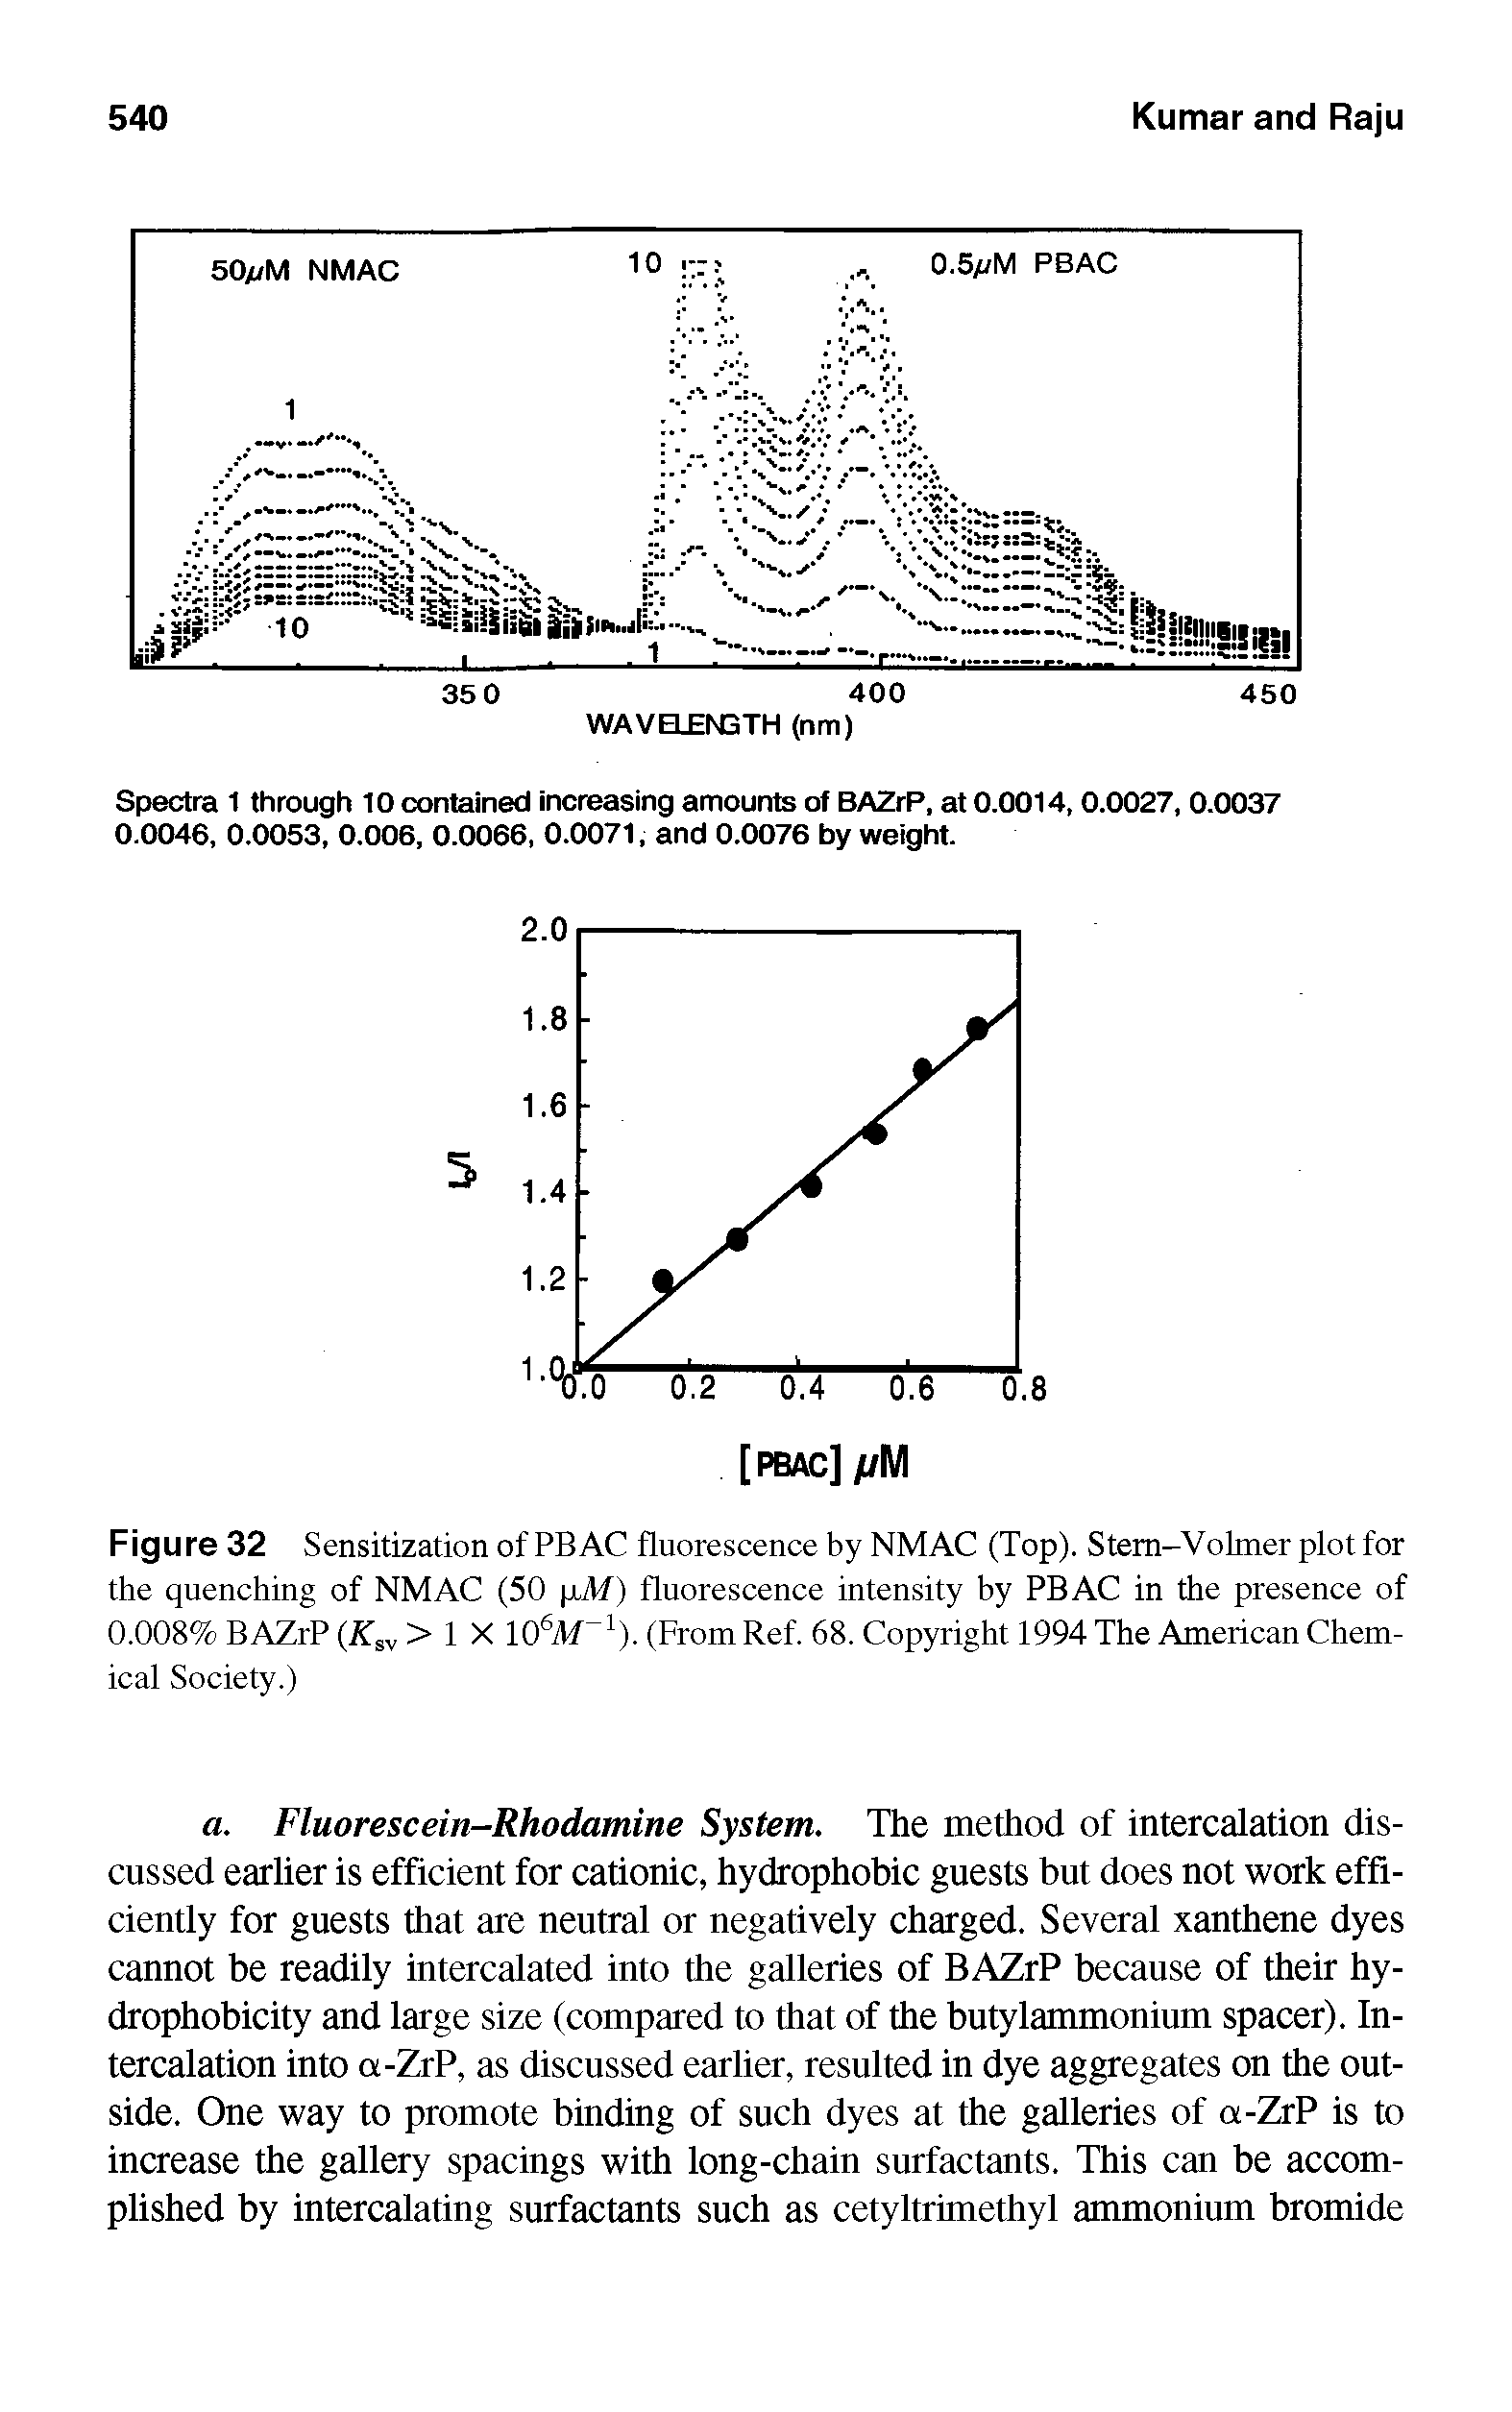 Figure 32 Sensitization of PBAC fluorescence by NMAC (Top). Stem-Volmer plot for the quenching of NMAC (50 pM) fluorescence intensity by PBAC in the presence of 0.008% BAZrP (ATSV > 1 X 106M 1). (From Ref. 68. Copyright 1994 The American Chemical Society.)...